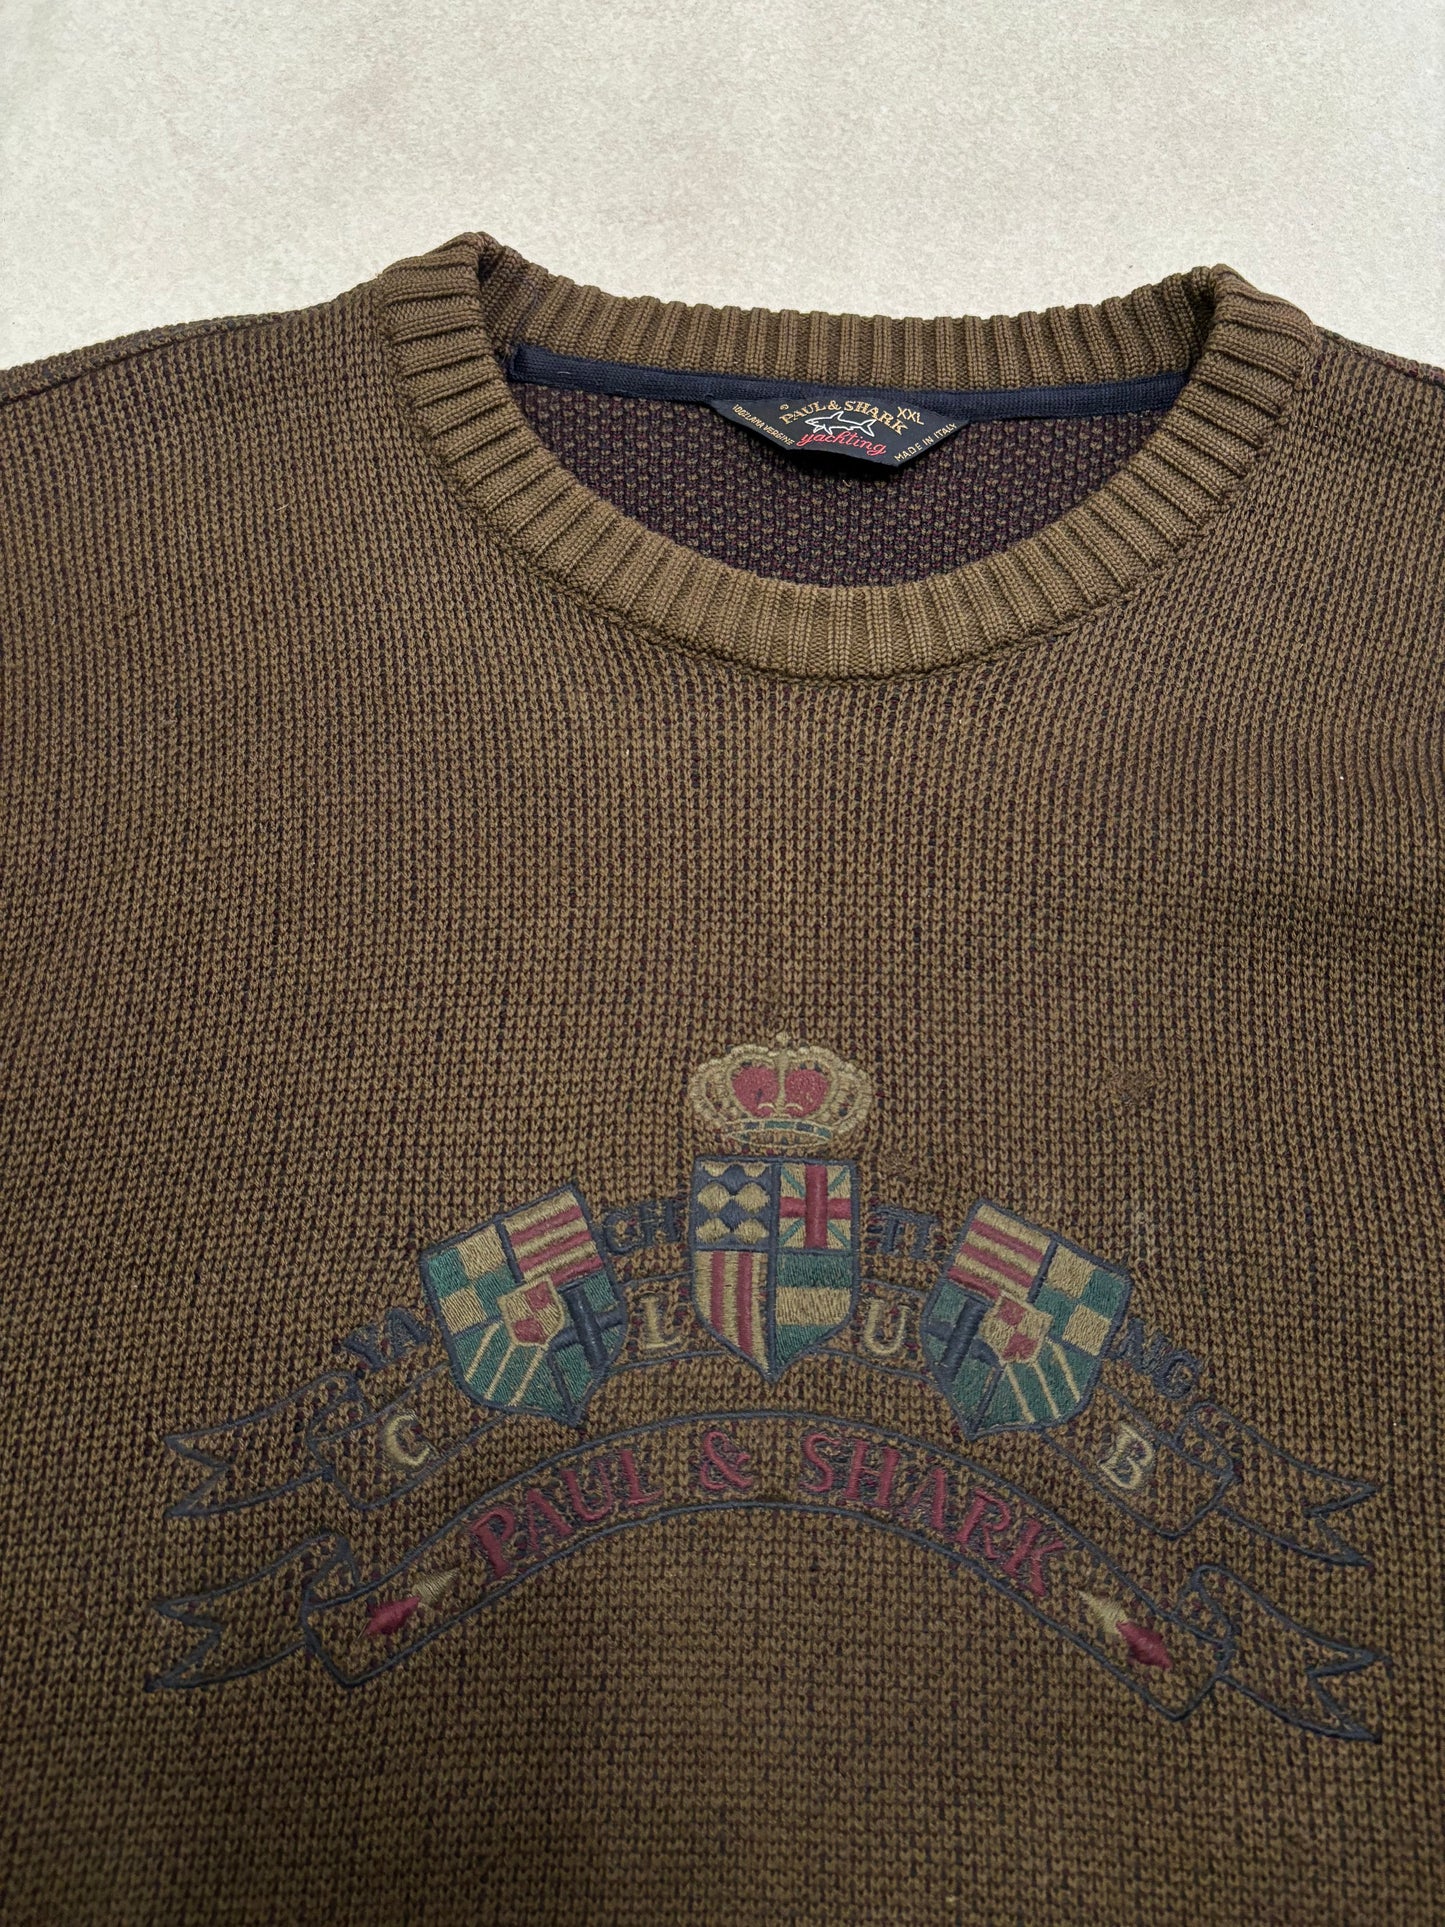 Paul &amp; Shark 'All Embroidered' Sweater 90s Made in Italy Vintage - XL